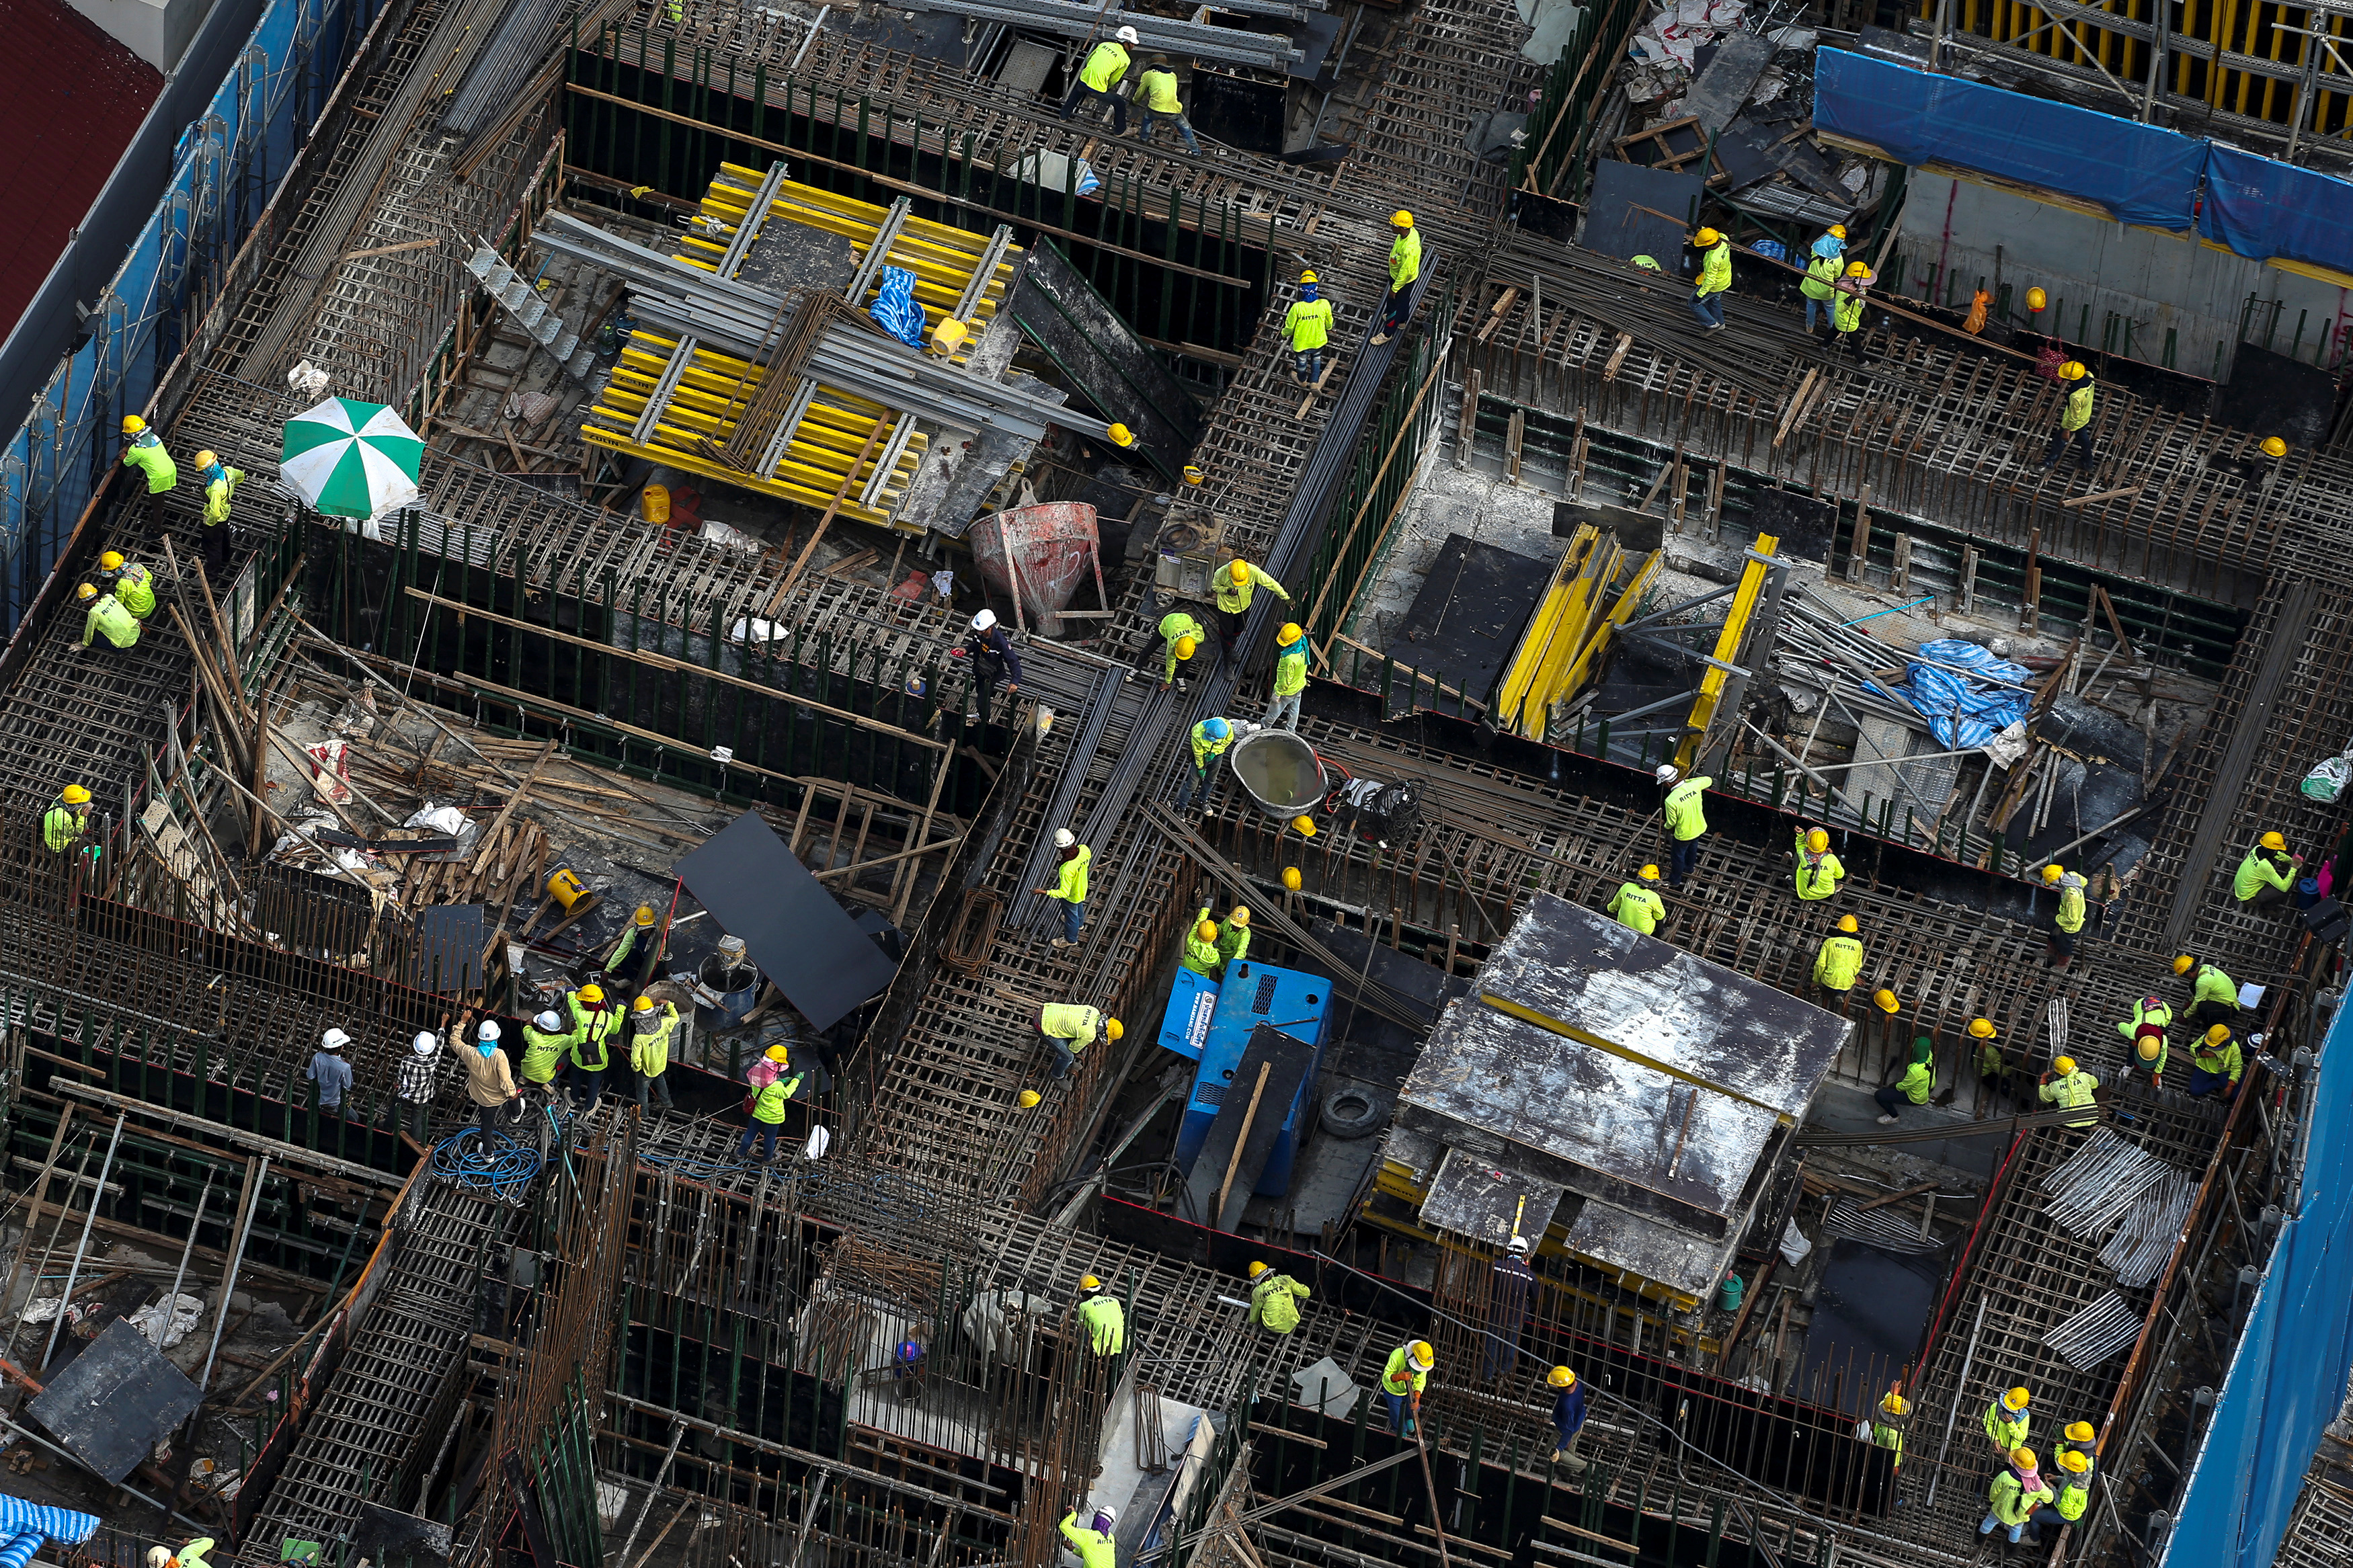 Workers work at a construction site in central Bangkok